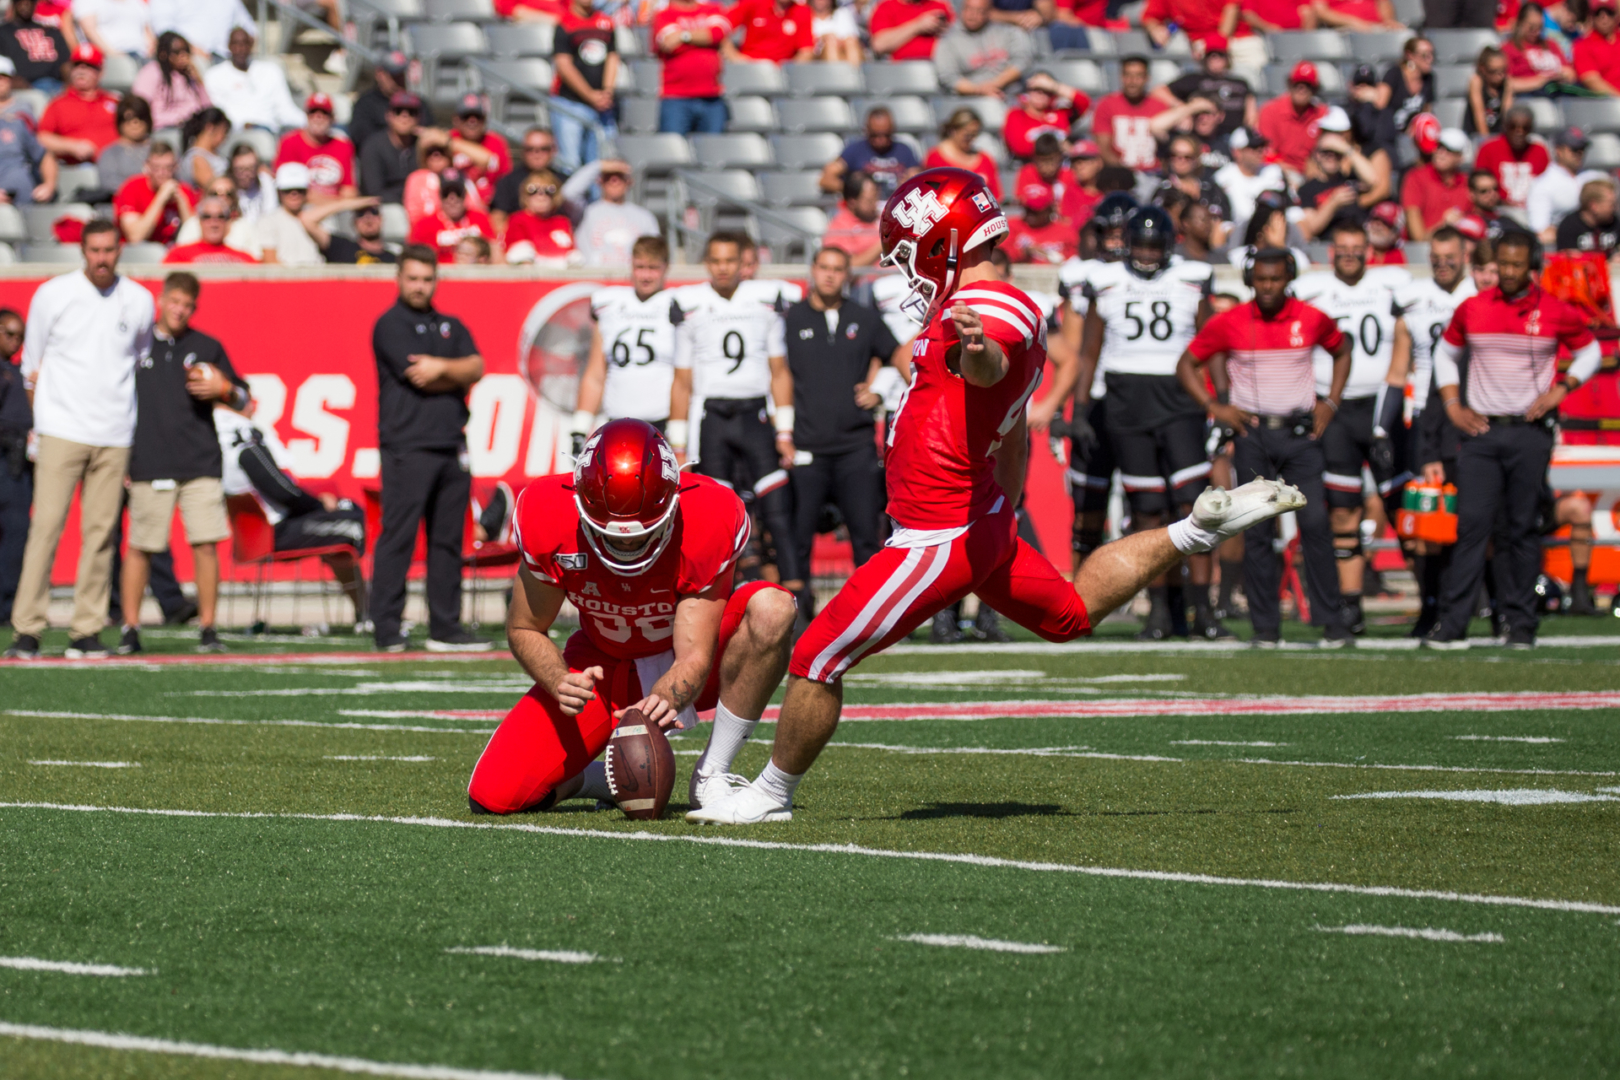 Junior kicker Dalton Witherspoon and Dane Roy both made The Cougar's All-Decade Team after their career years for Houston in 2019. | Trevor Nolley/The Cougar